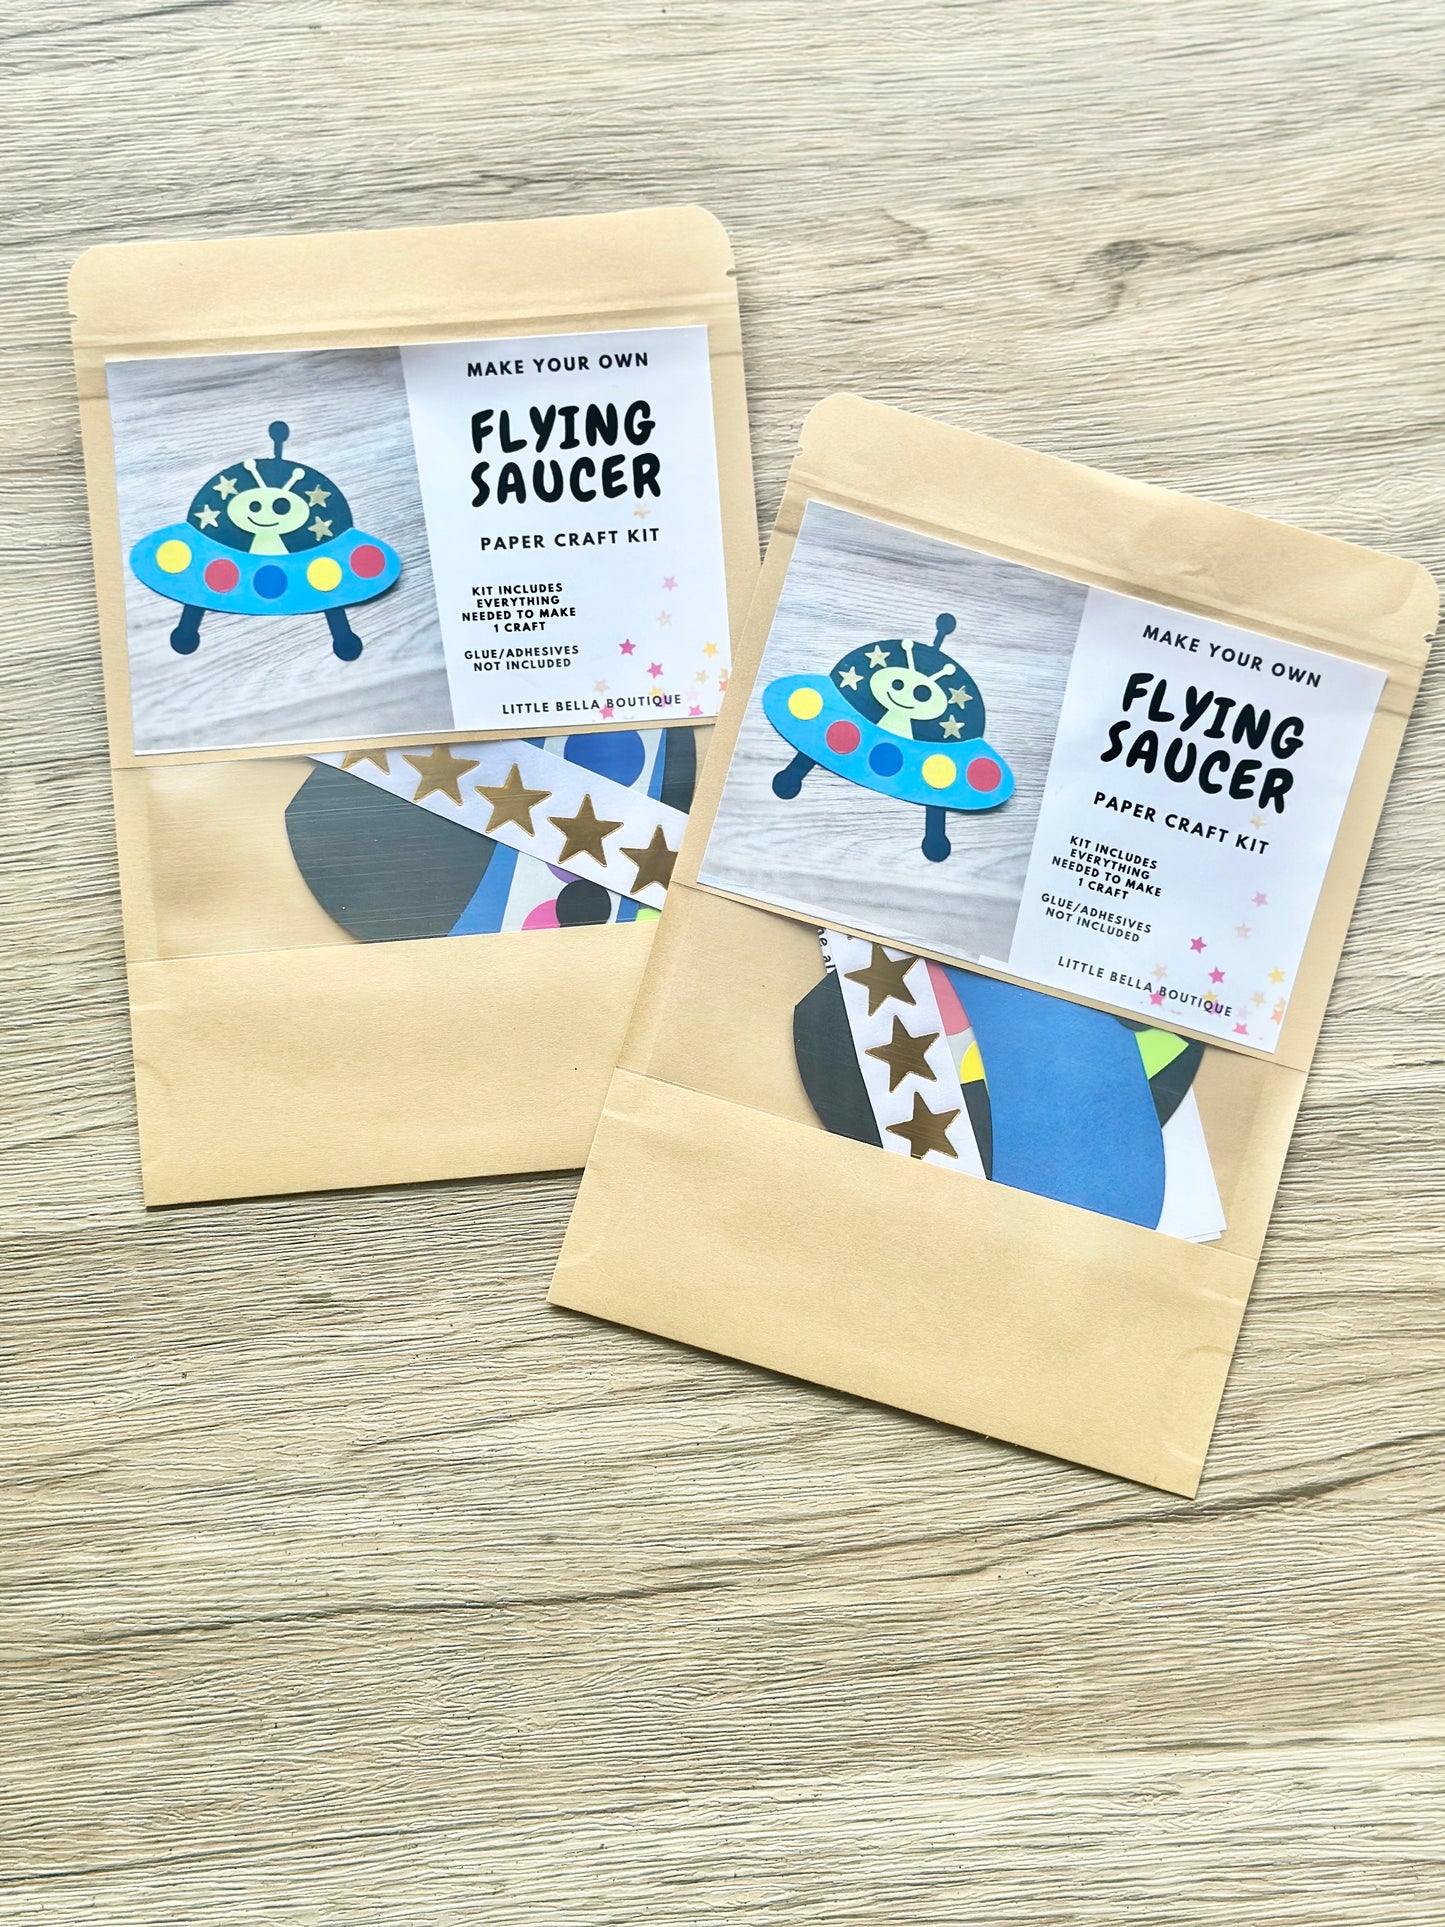 Make Your Own Flying Saucer Paper Craft Kit